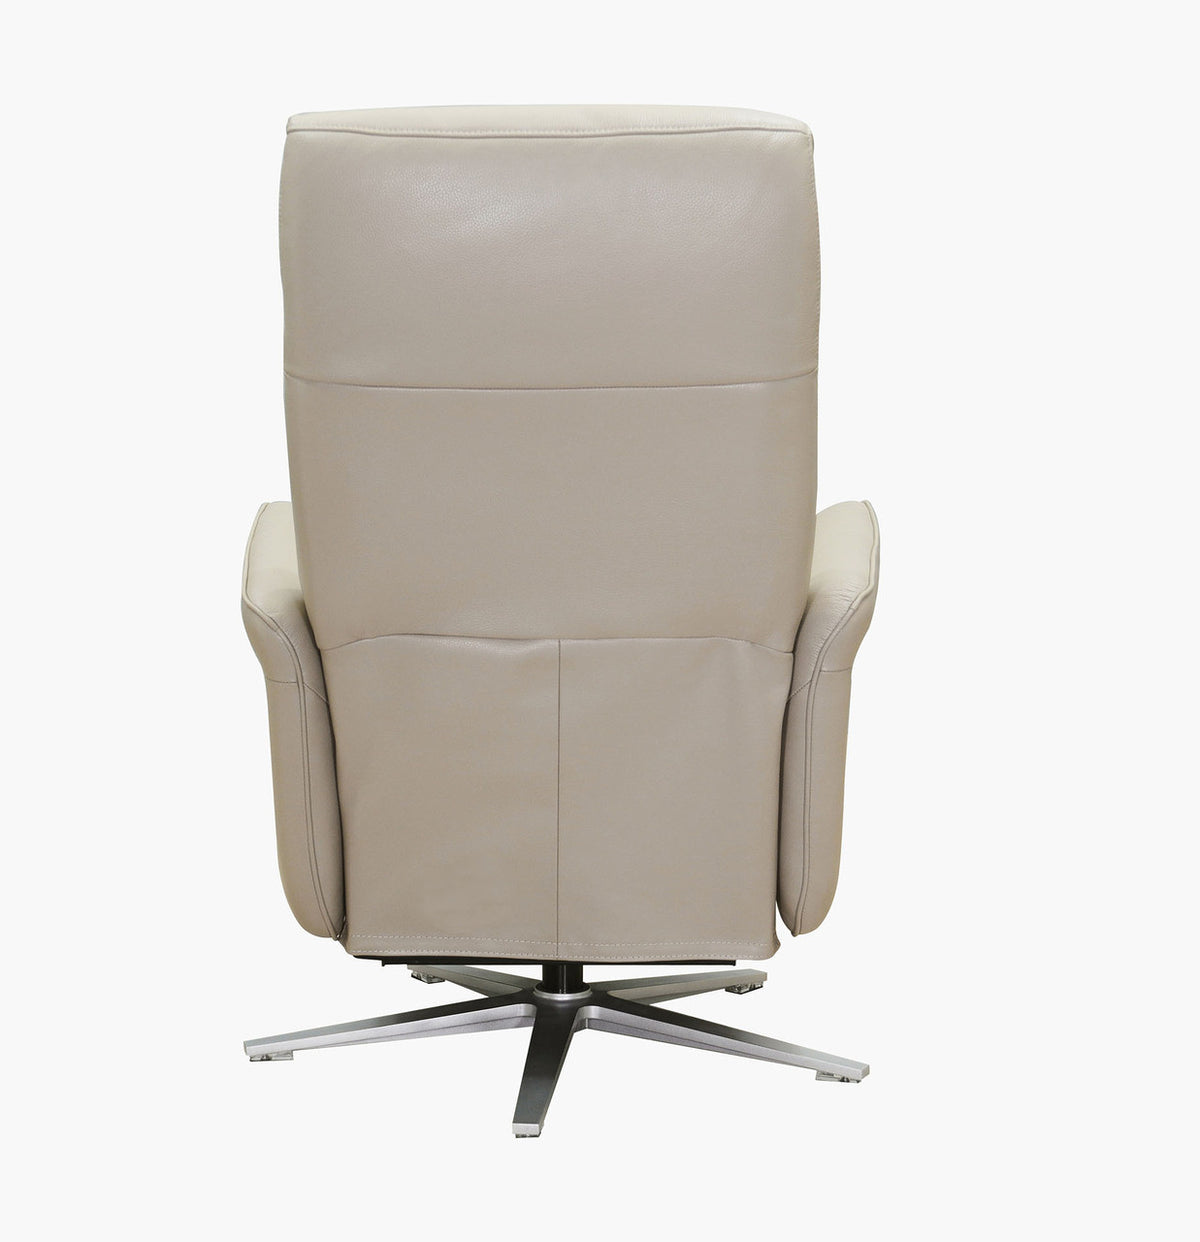 Tulip Taupe Leather Power Reclining 360 Swivel Chair - MJM Furniture